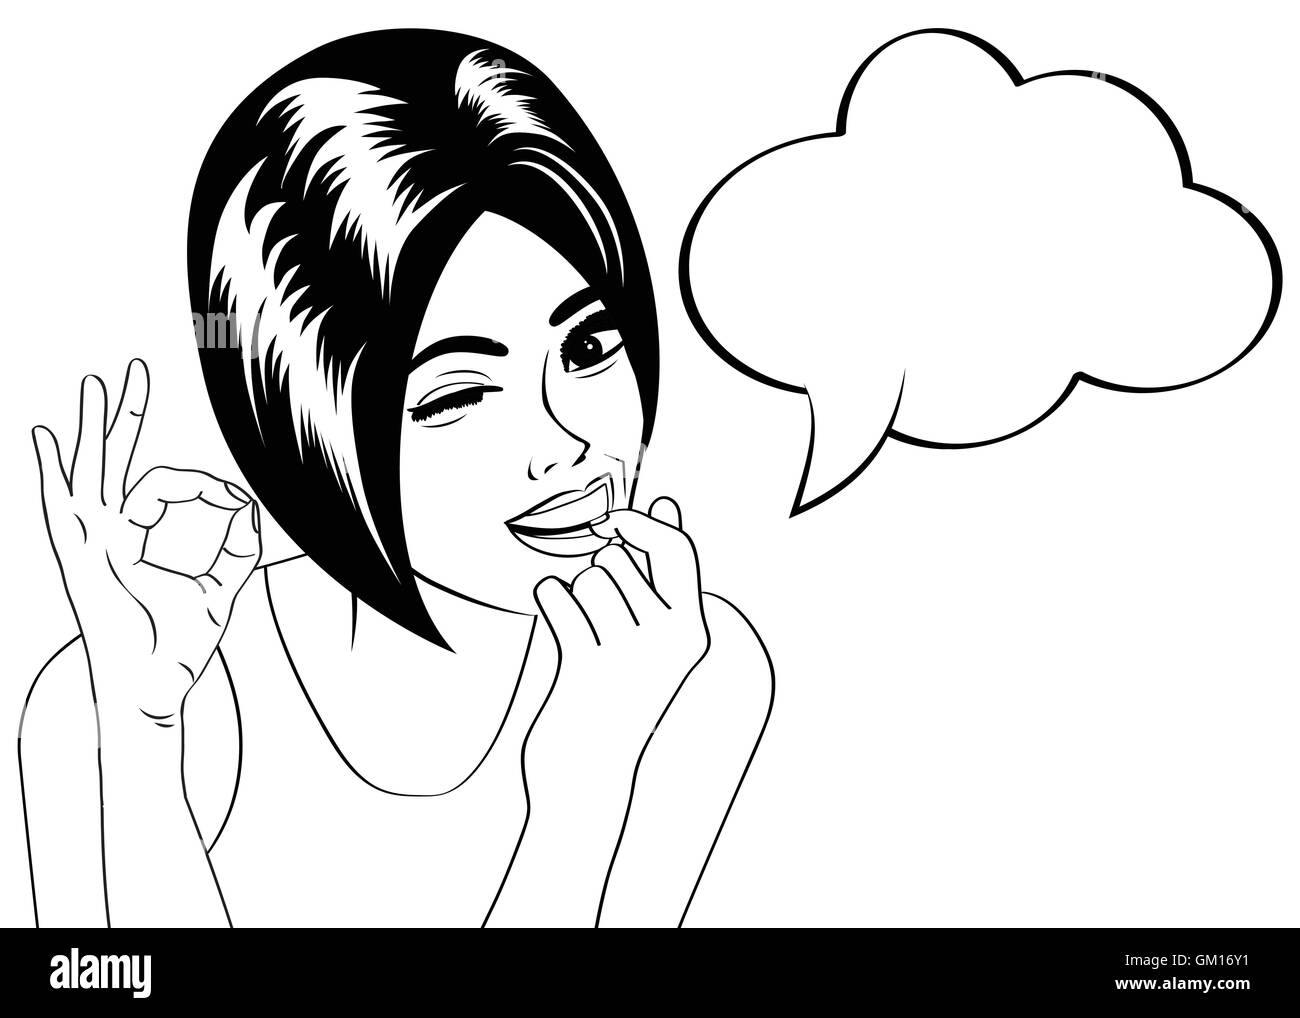 pop art cute retro woman in comics style in black and white Stock Vector